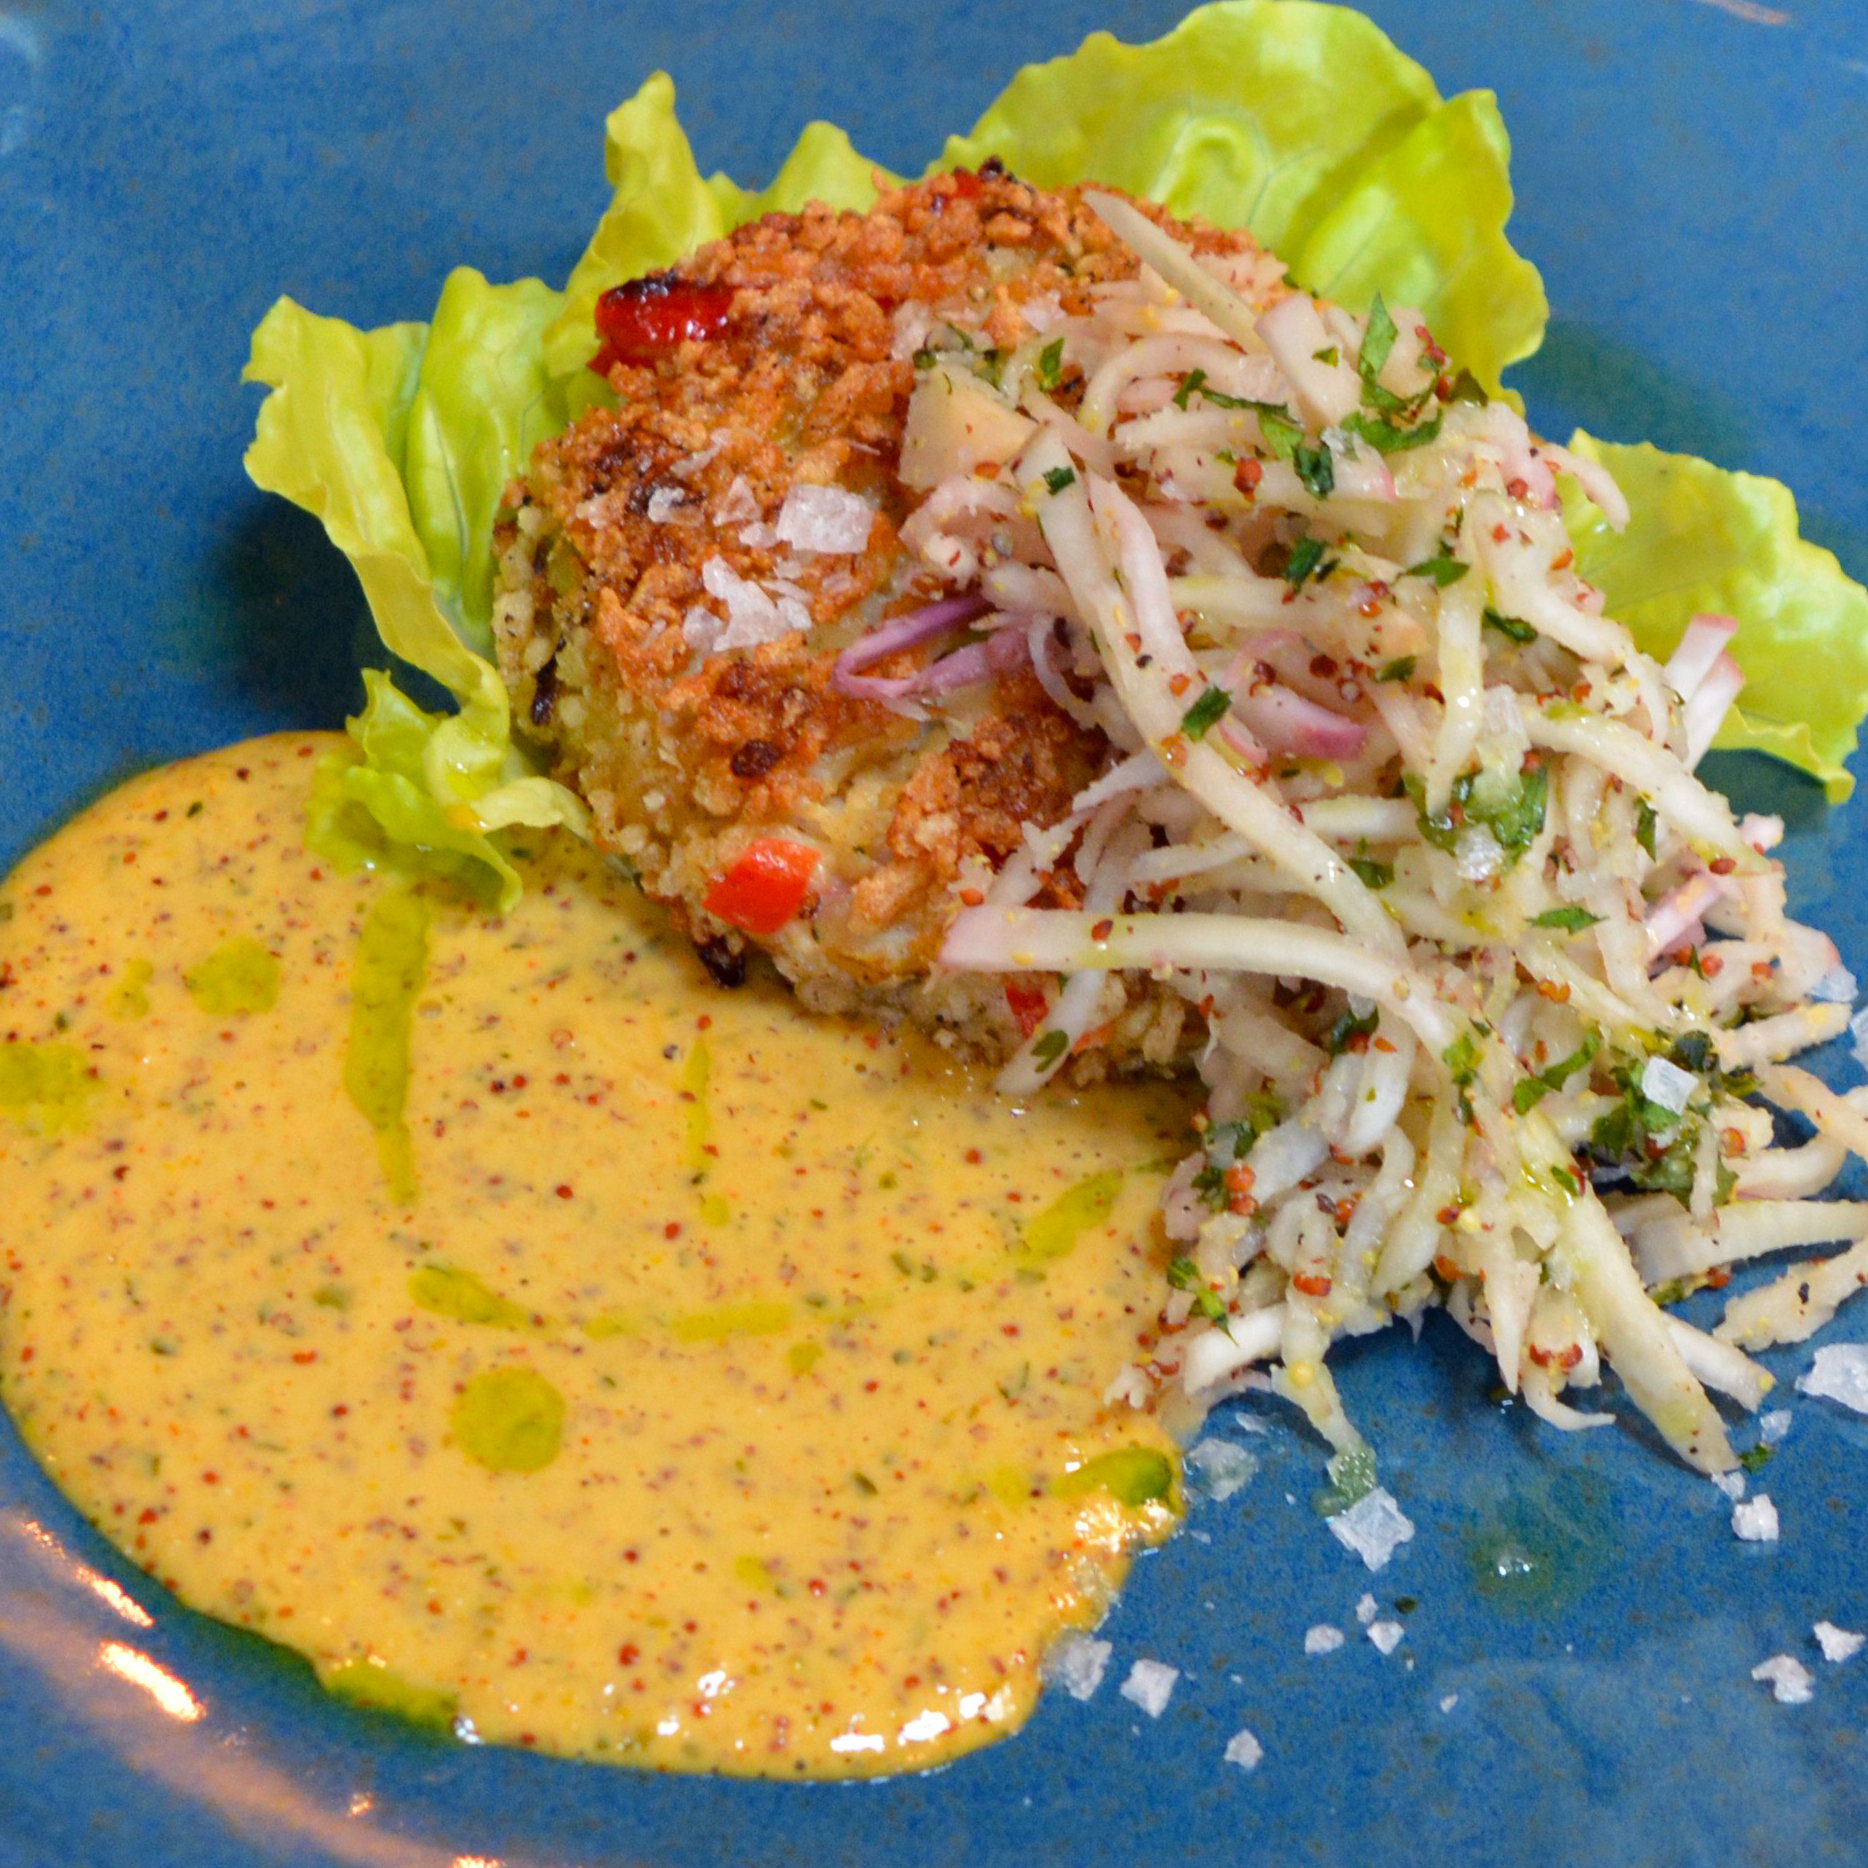 A Crab Cake with lettuce and coleslaw